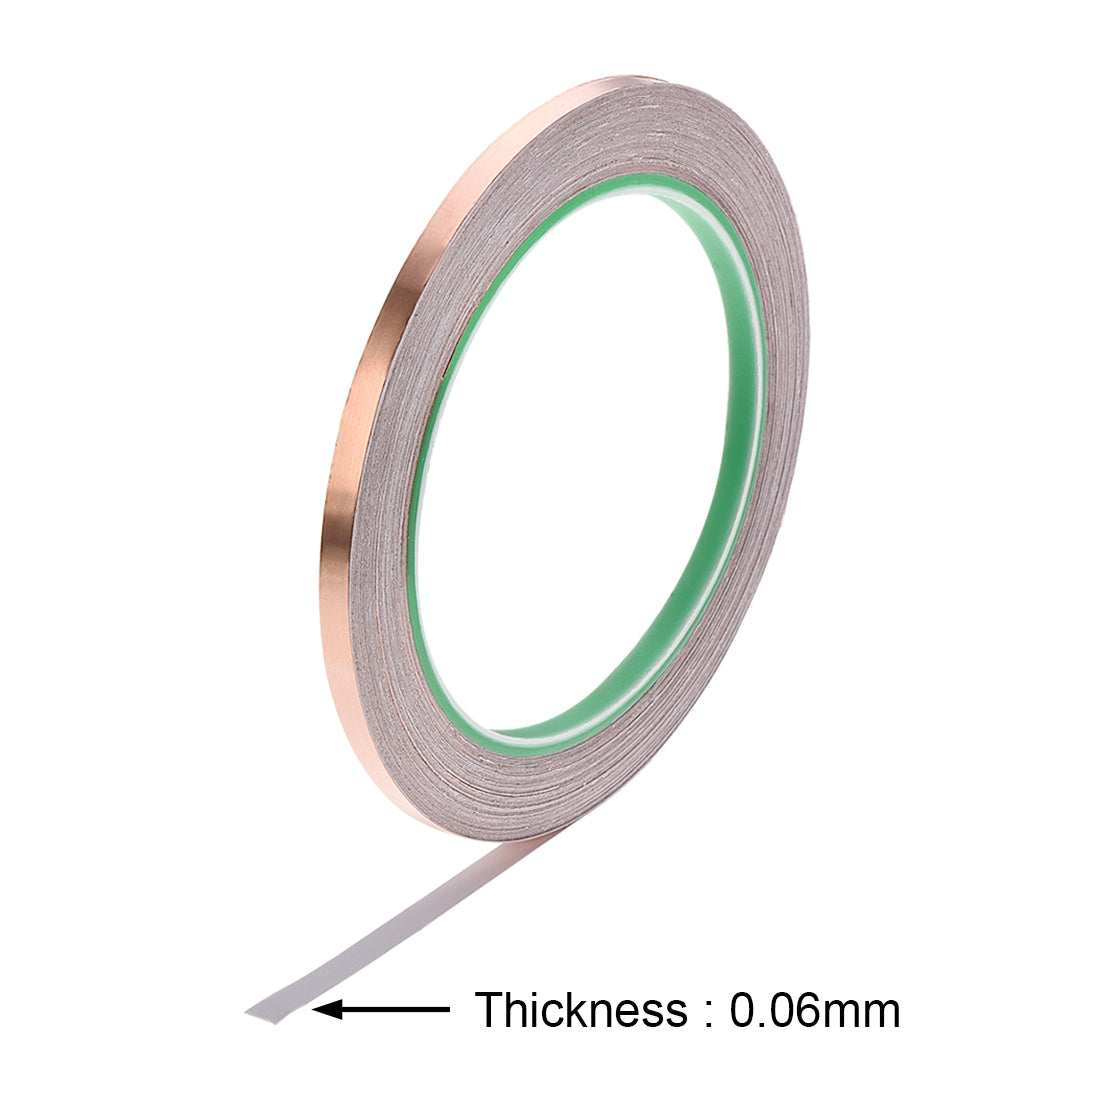 uxcell Uxcell Double Sided Conductive Tape Copper Foil Tape 5mm x 20m/65.6ft for EMI Shielding